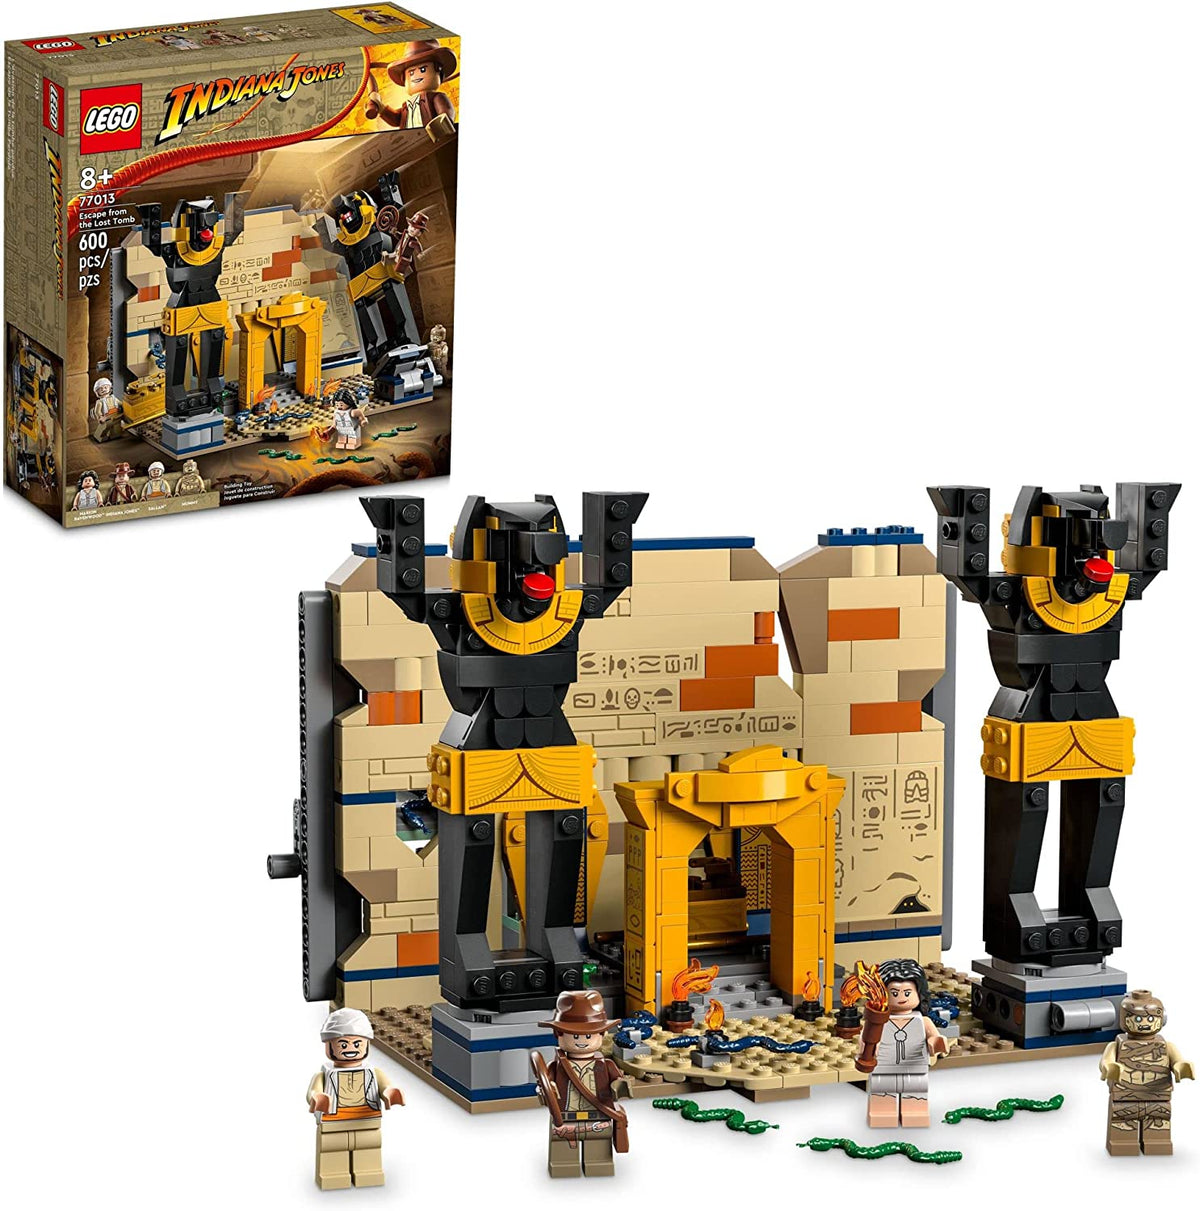 Lego 77013 Indiana Jones Escape From The Lost Tomb